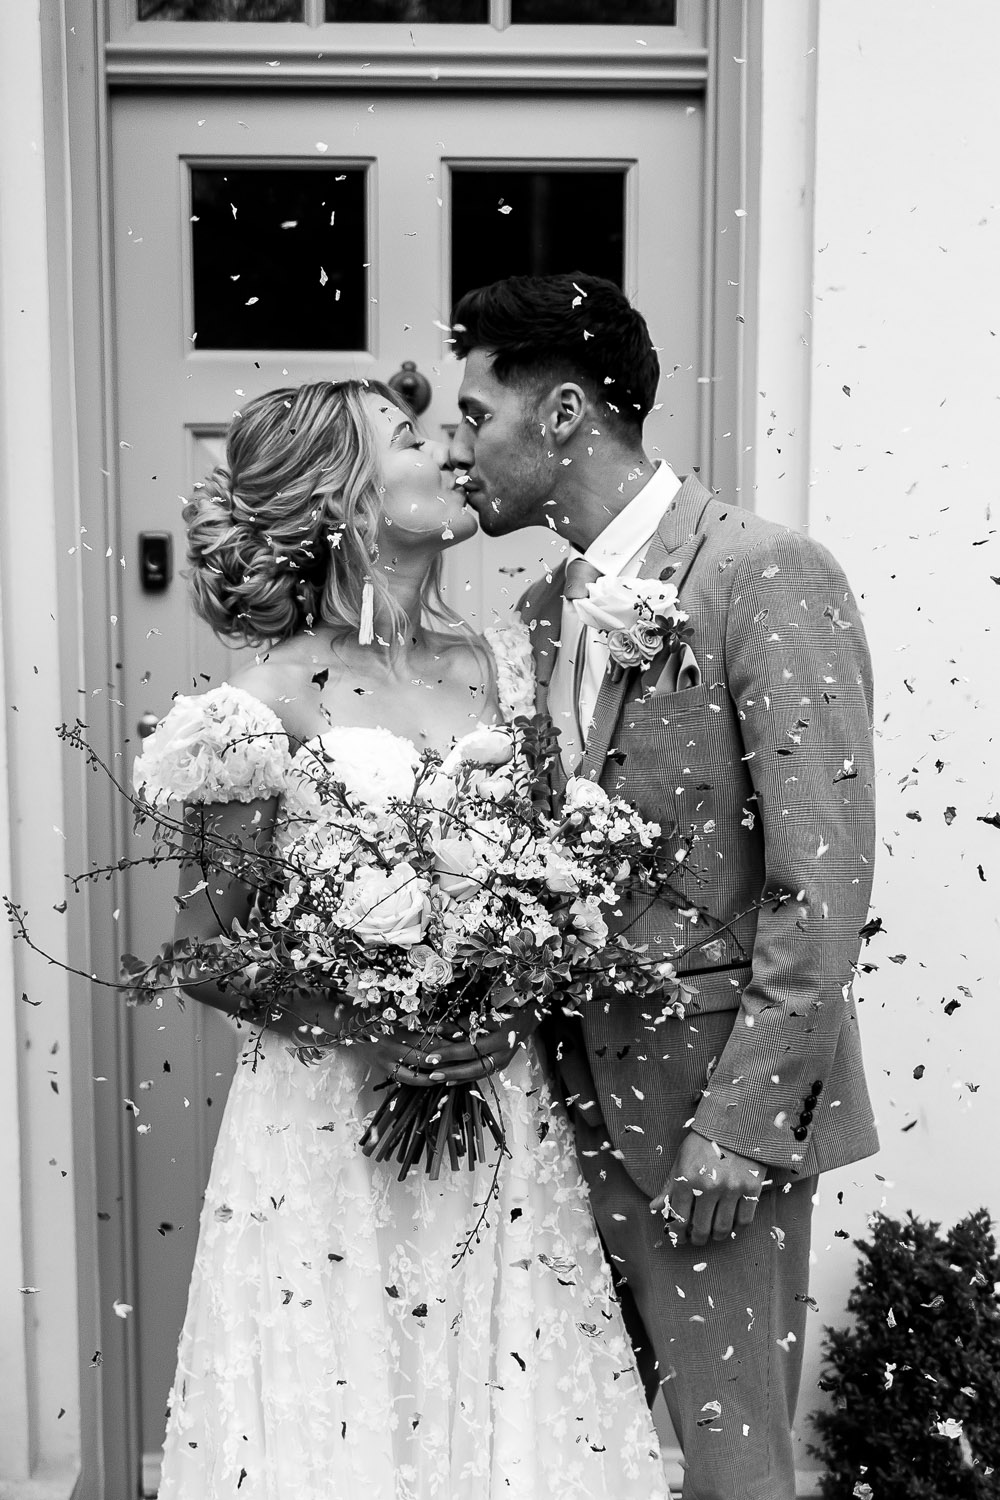 Romantic wedding photography from The Elm Tree Lincs